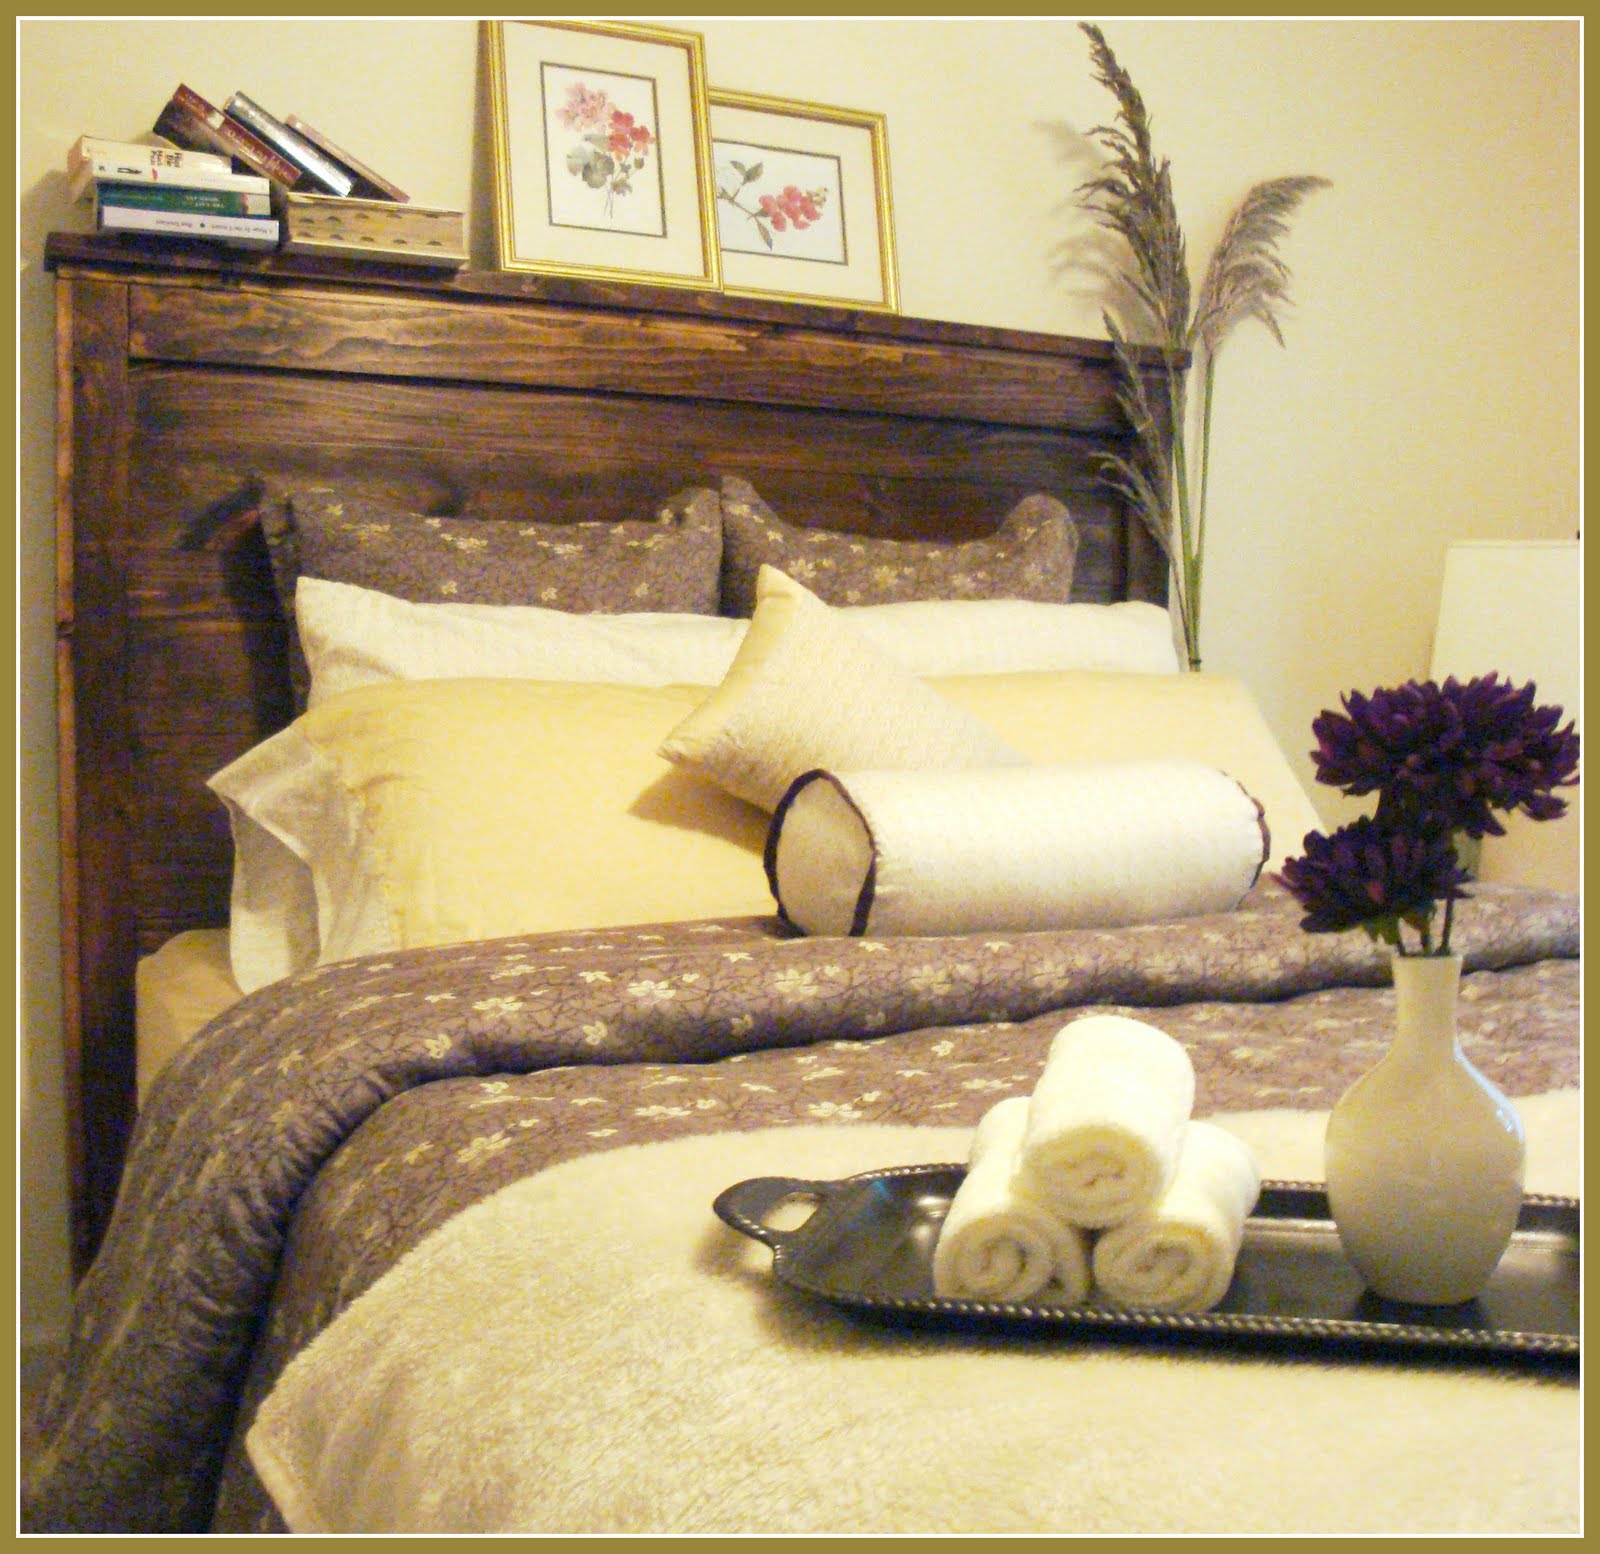 how to make a wood headboard for a bed